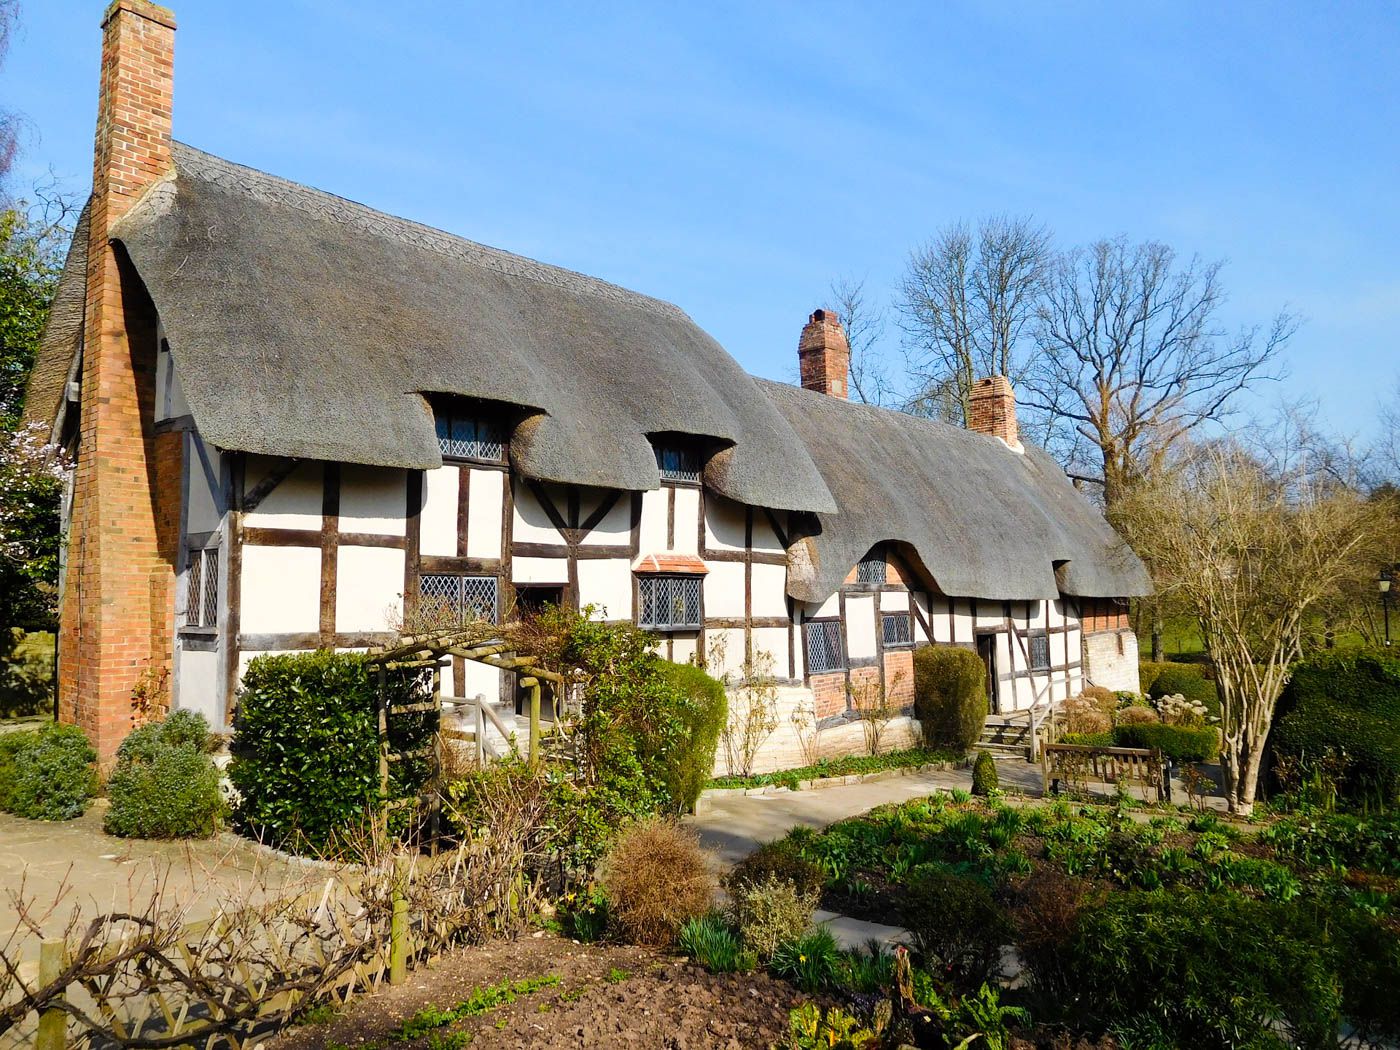 Stratford-upon-Avon Travel Costs & Prices - Shakespeare's Birthplace